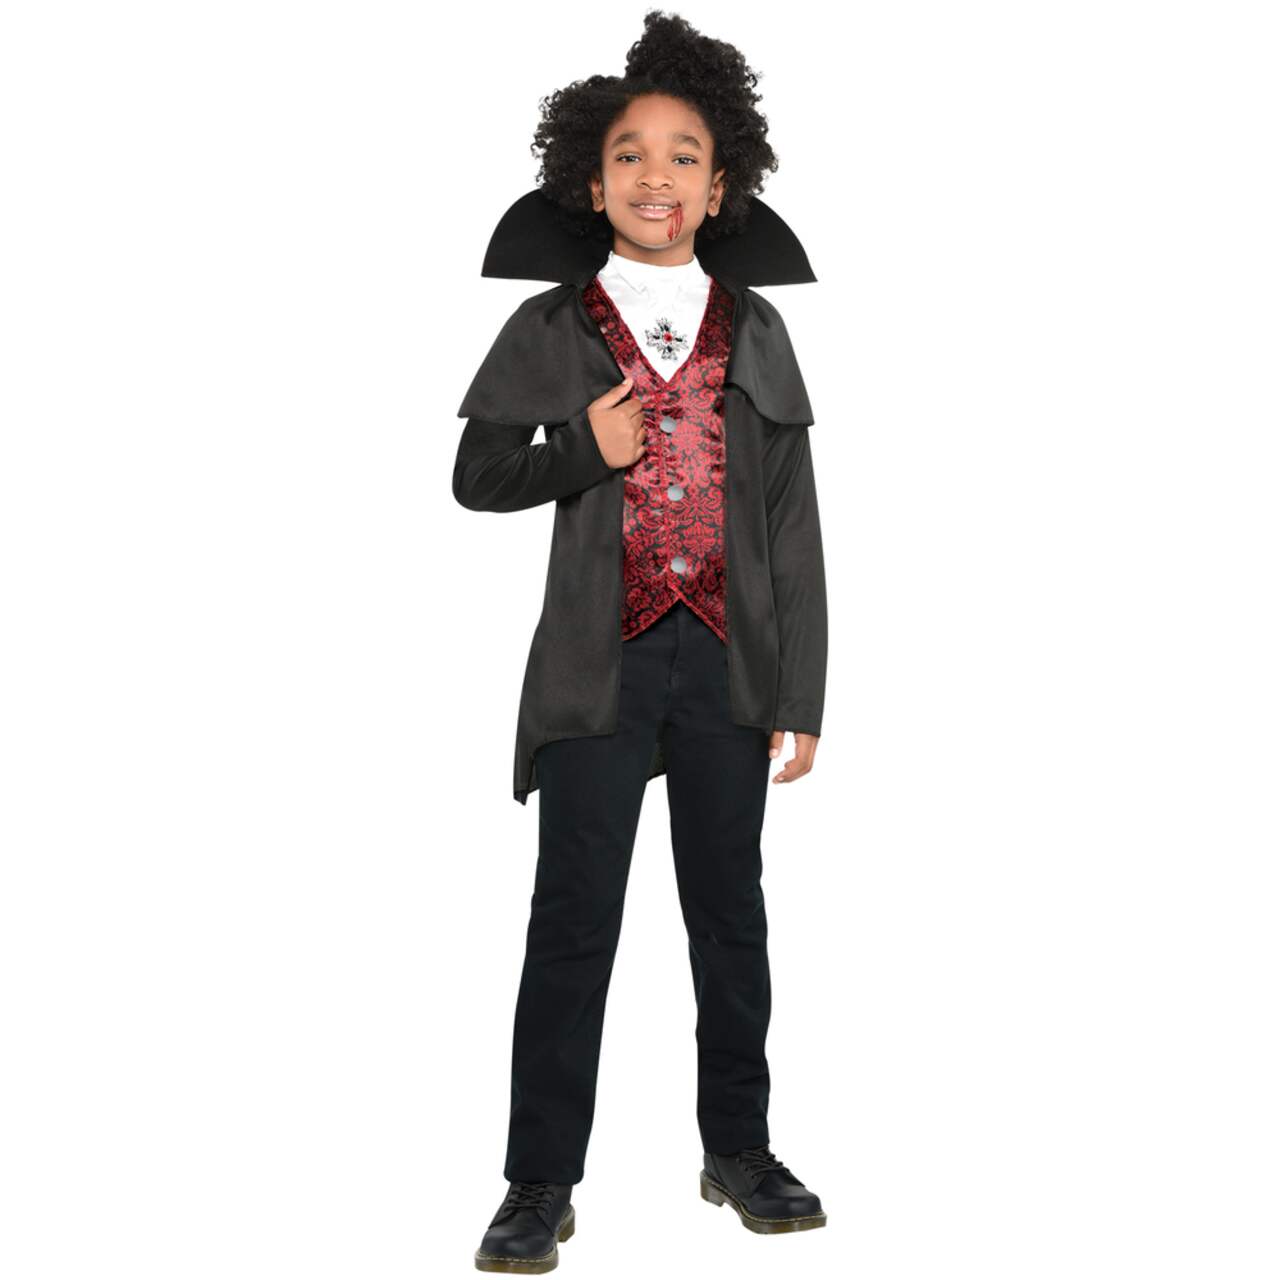 https://media-www.canadiantire.ca/product/seasonal-gardening/party-city-seasonal/party-city-halloween-and-fall-decor/8549715/boys-dracula-costume-small-cec17338-8308-4f19-929d-e985dd1e6446.png?imdensity=1&imwidth=640&impolicy=mZoom